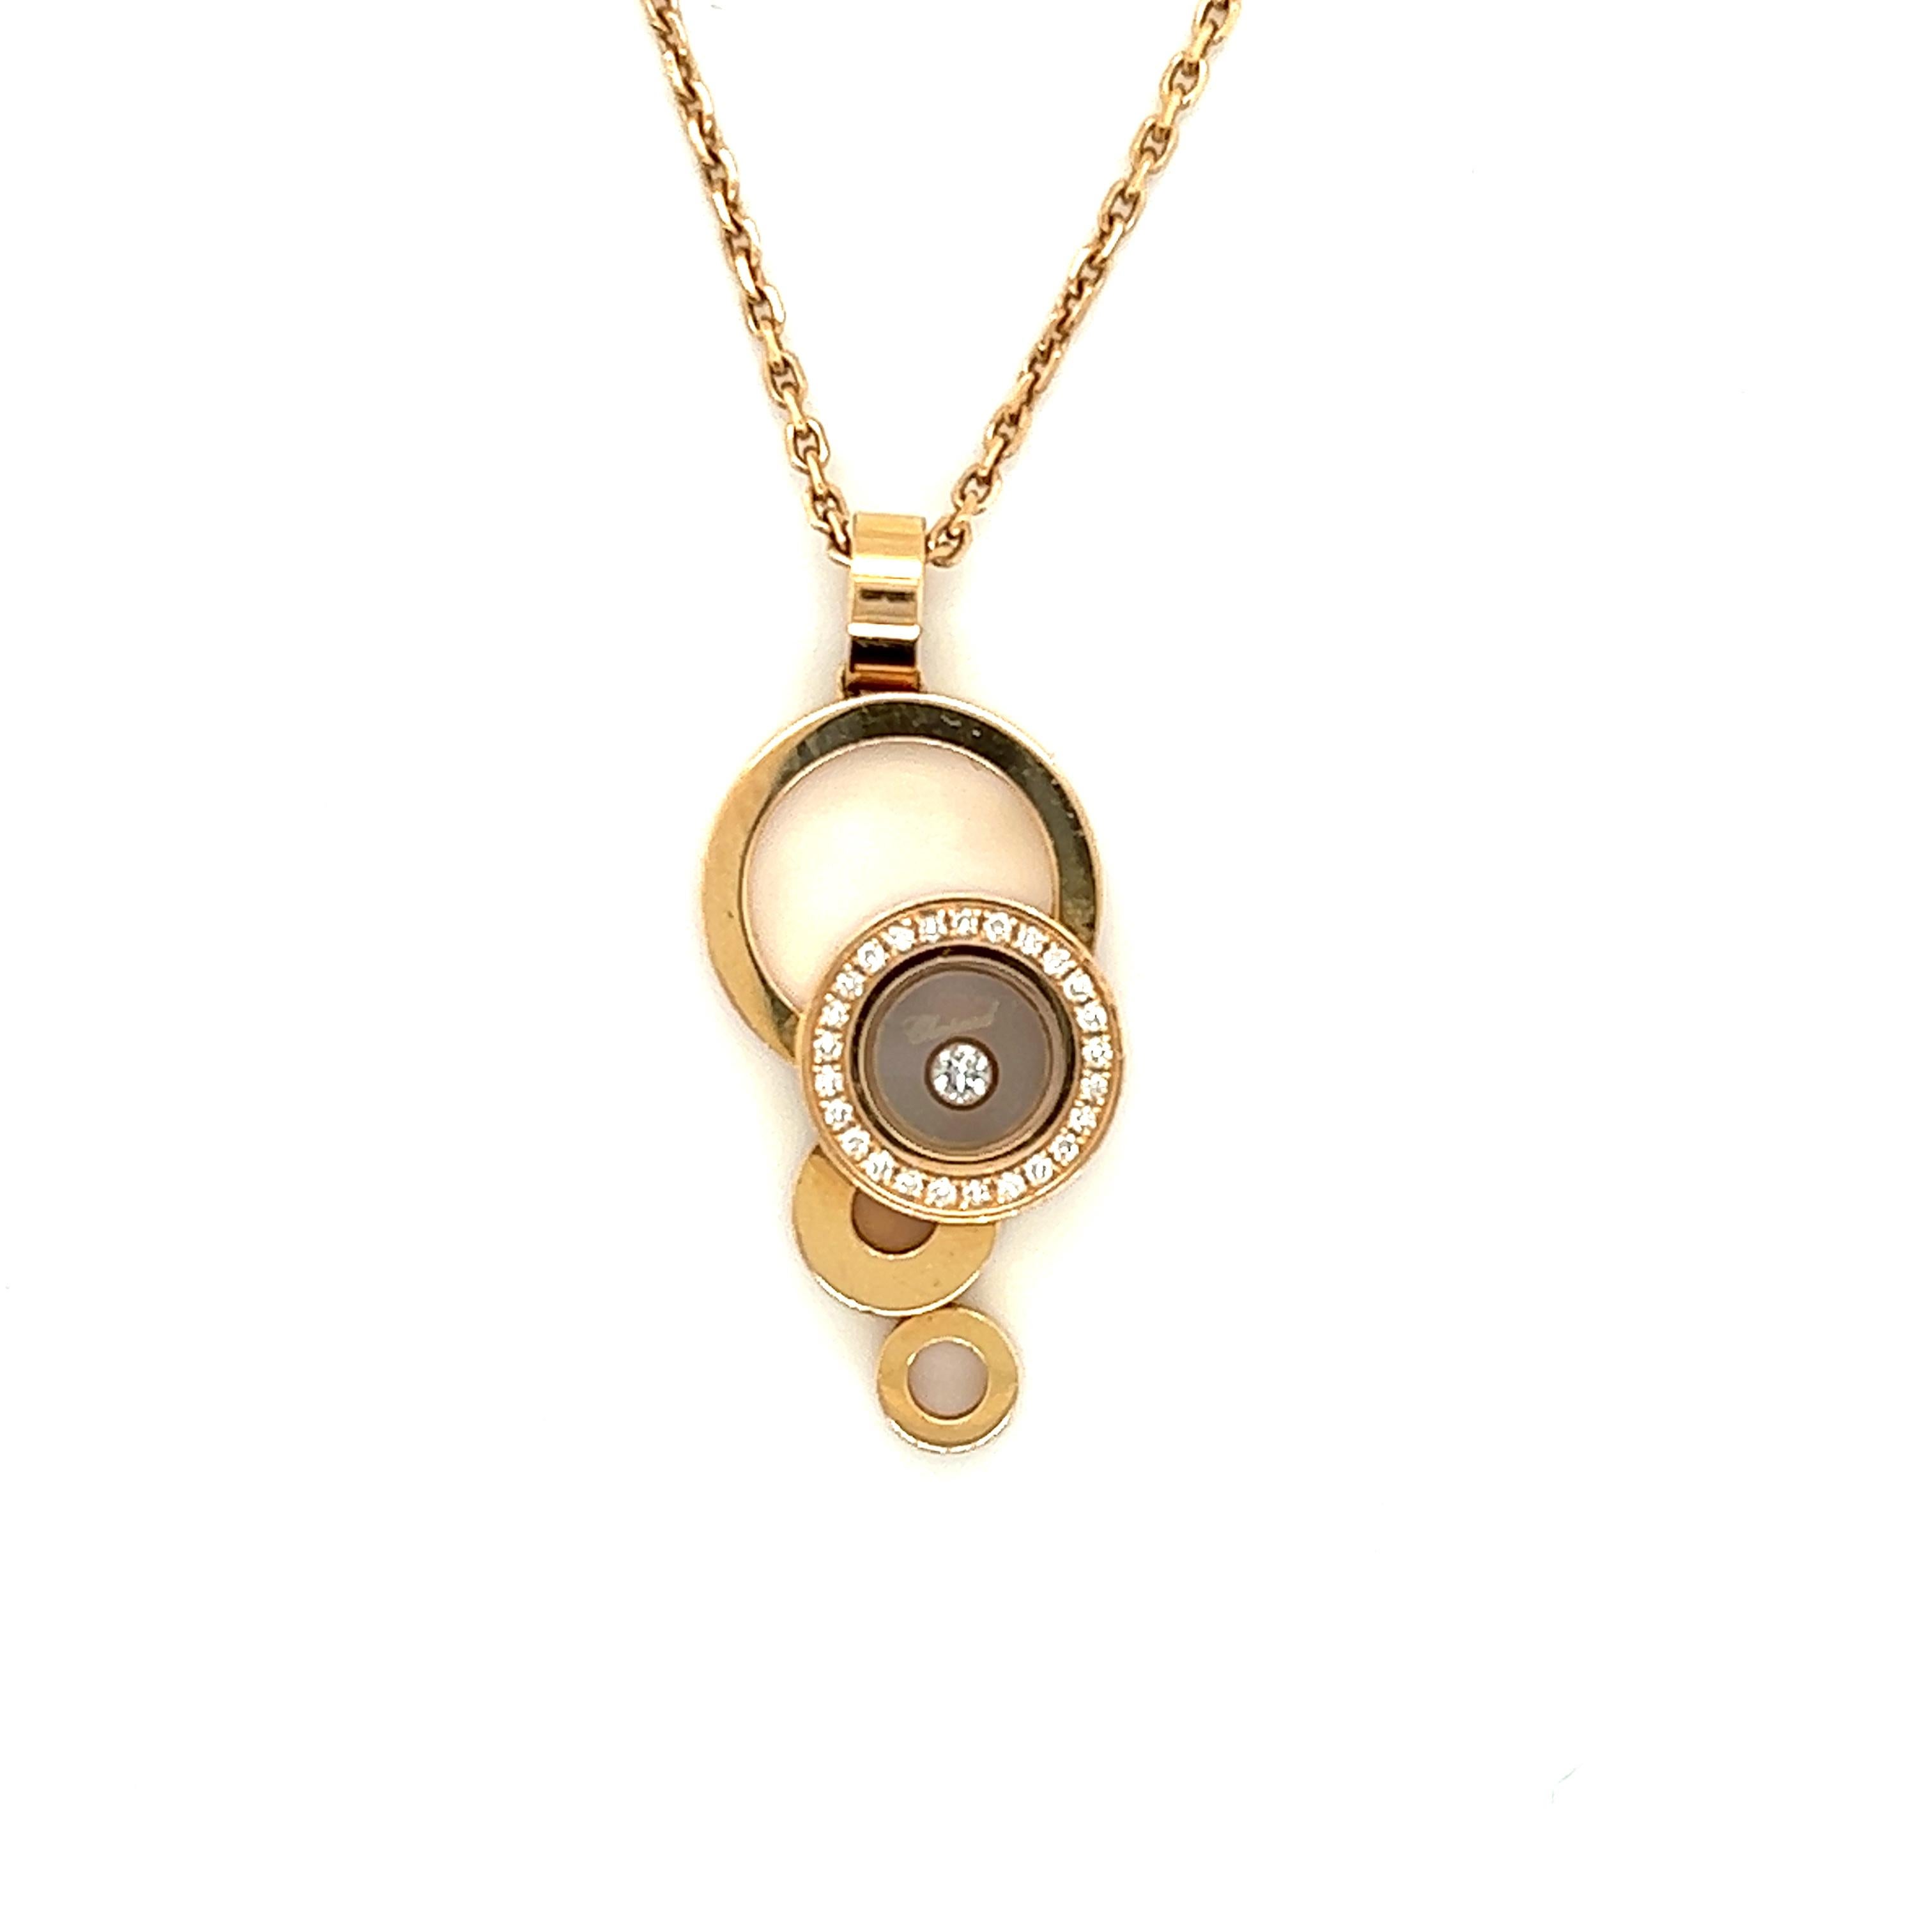 Beautiful necklace crafted by famed designer Chopard. This elegant necklace is crafted in 18k rose gold and measures 18